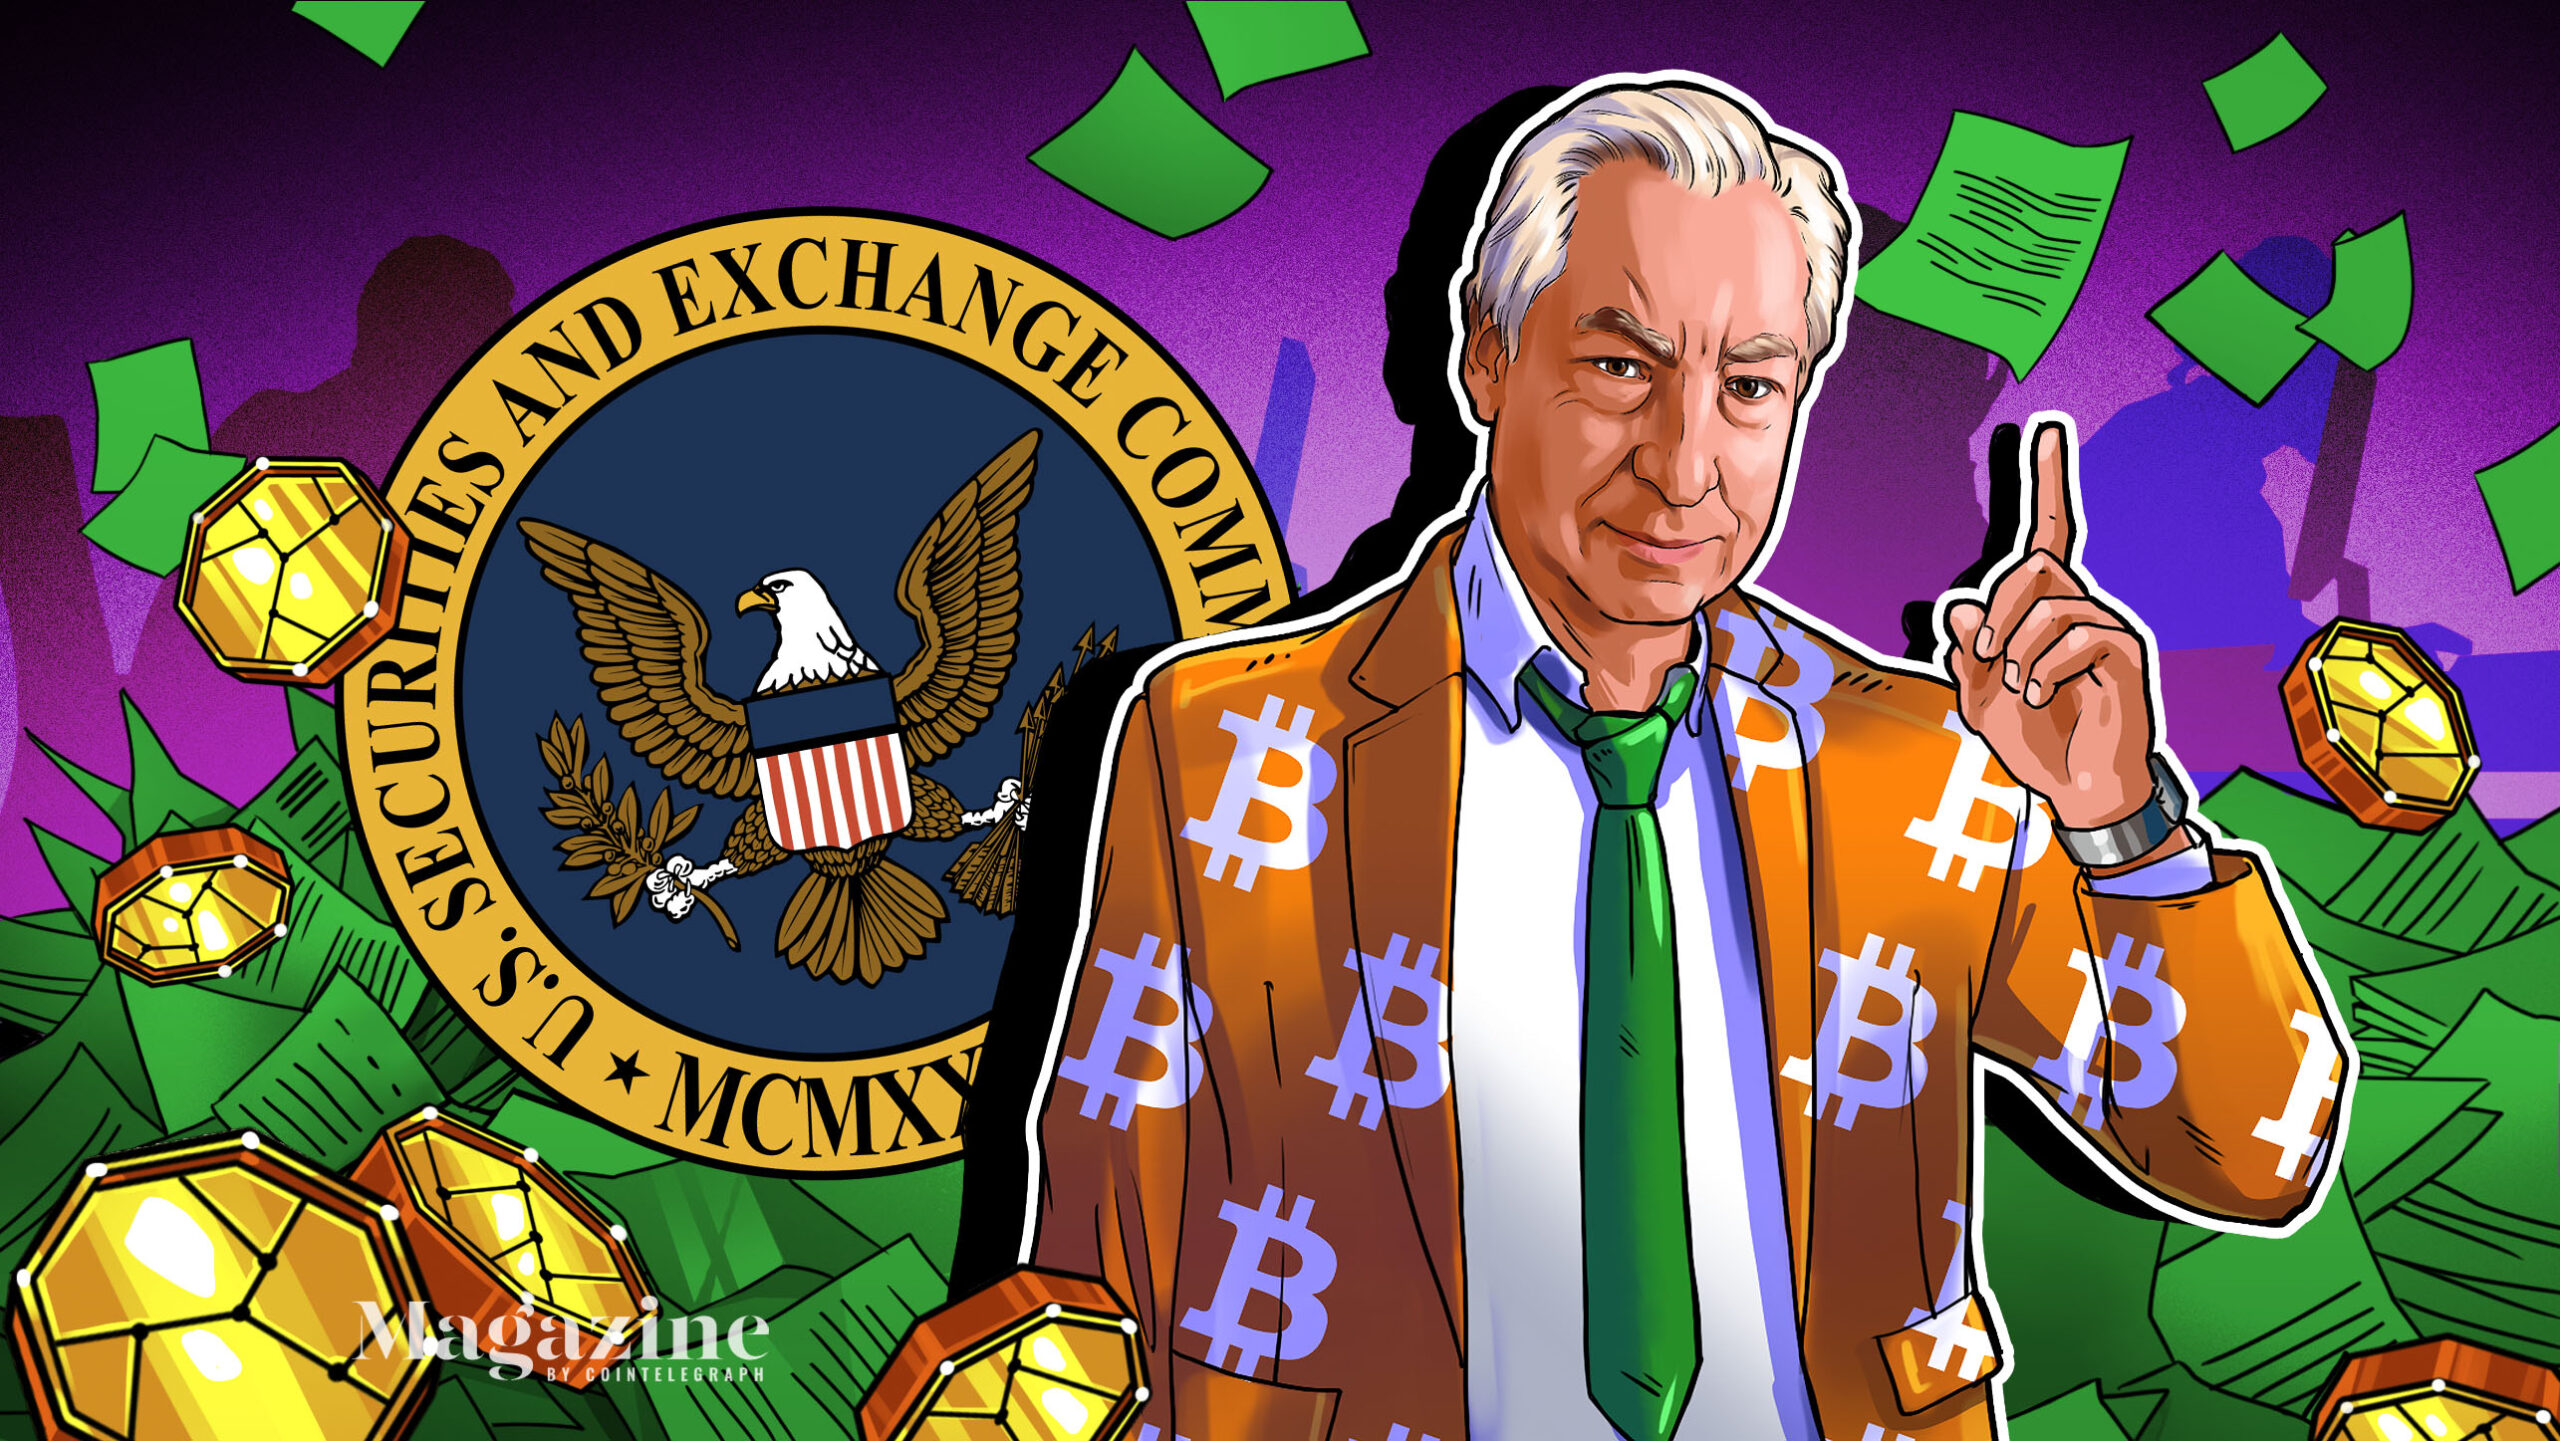 Powers-on…-it’s-been-a-wonderful-life-(week):-sec-commissioner-peirce,-bitcoin-2022-and-more